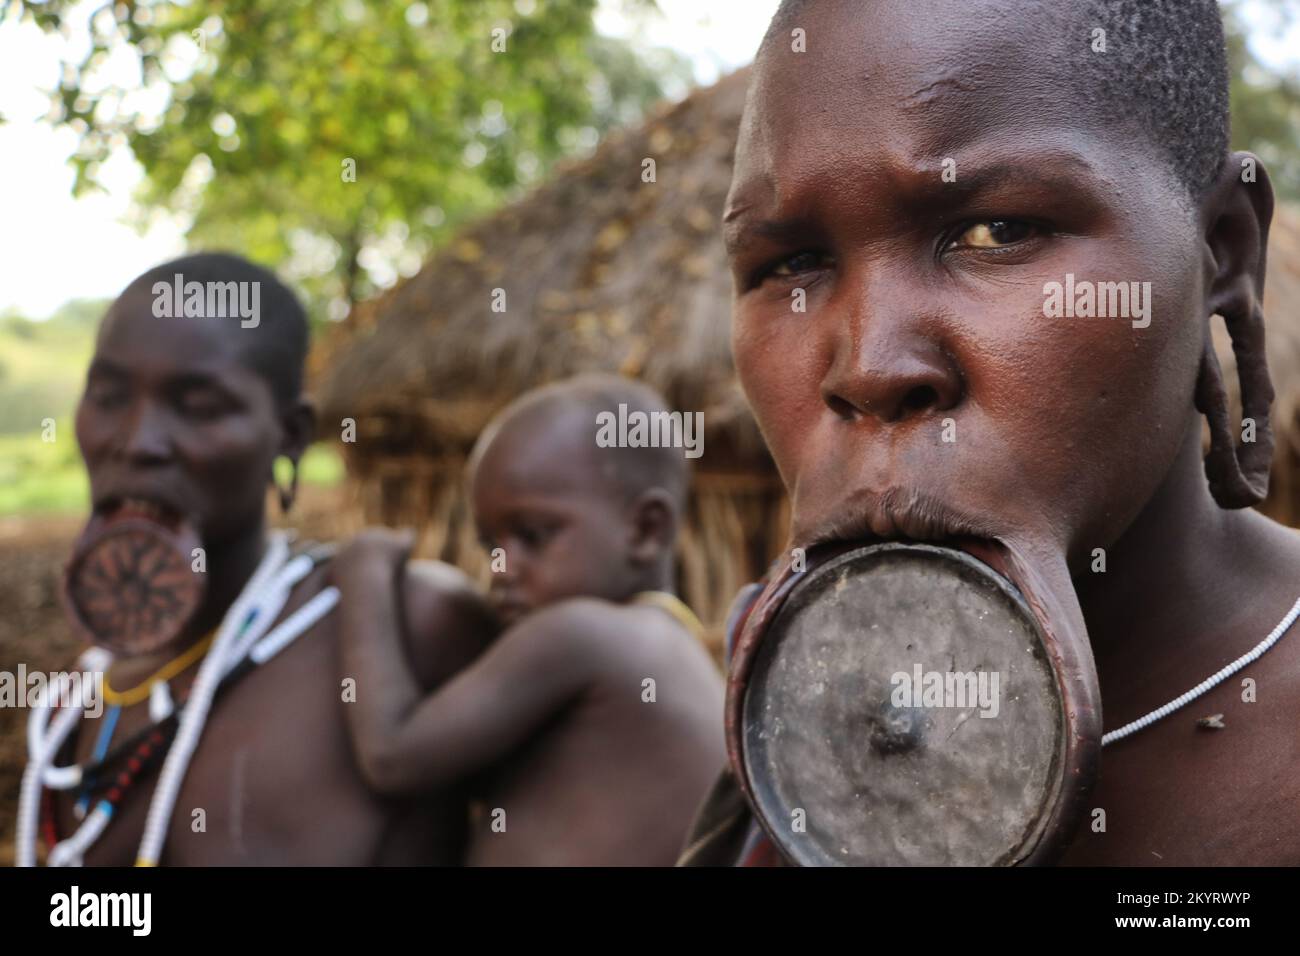 Mursi women with labial plate and son, ethnic minorities of the lower Omo valley - Ethiopia. Stock Photo